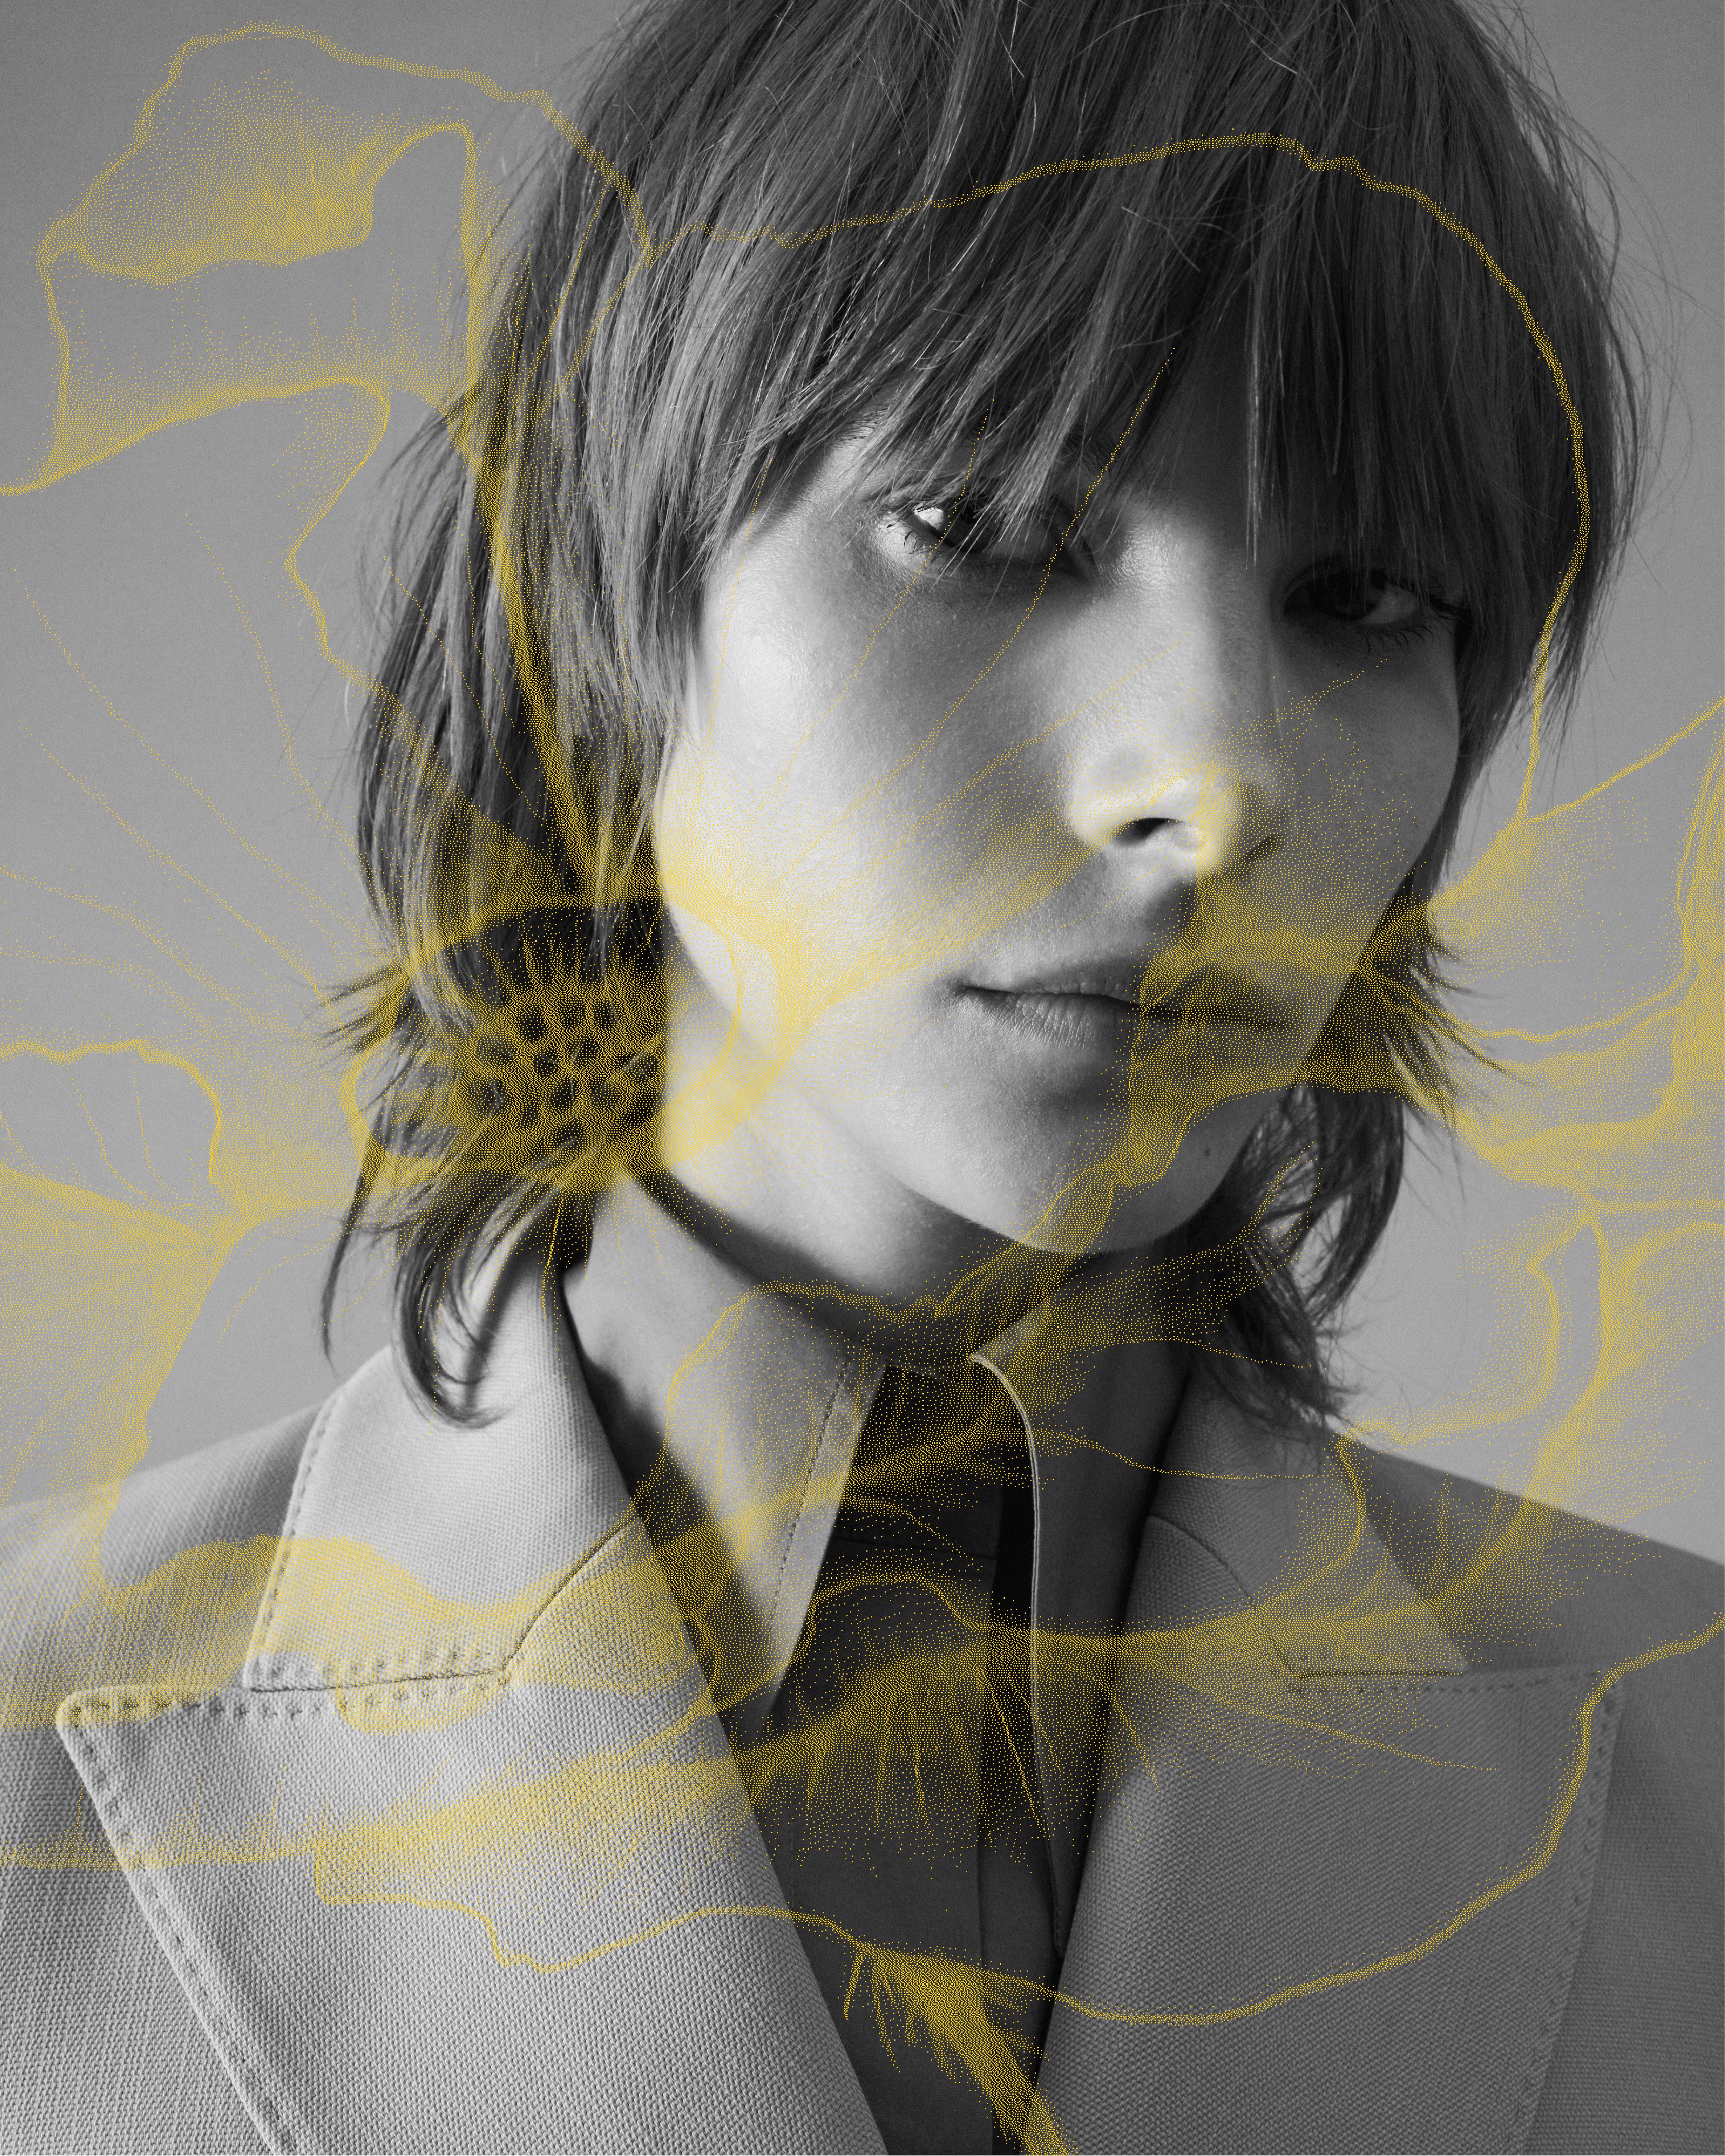 Black and white image of close up of model's face with yellow poppy illustration overlaid on top